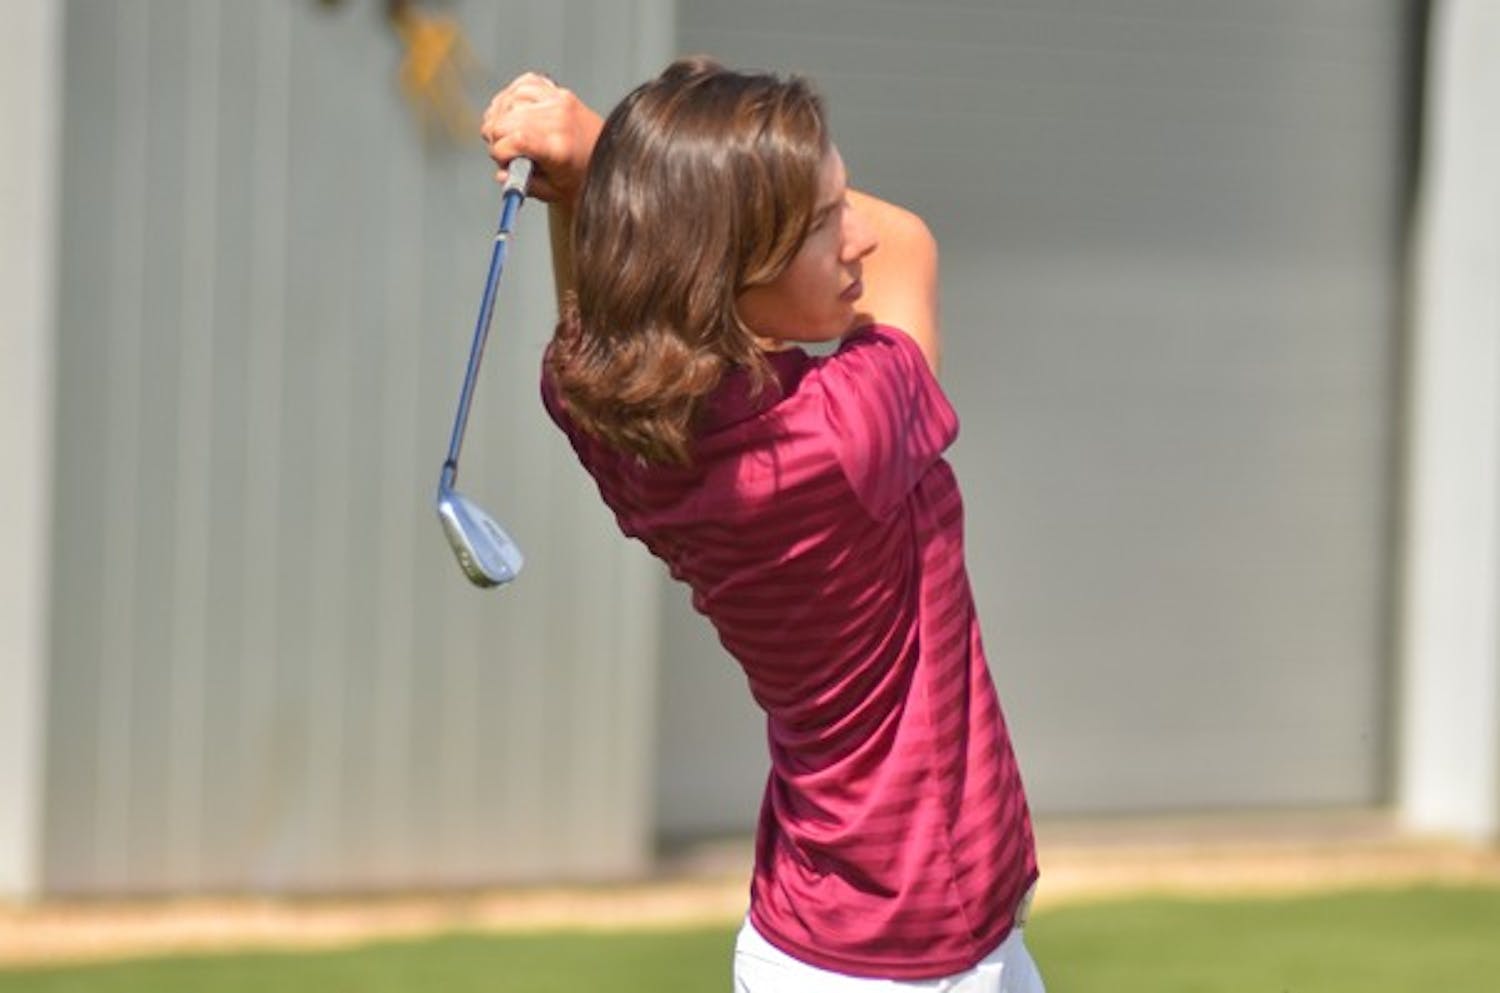 Trying to Three-Peat: ASU junior Carlota Ciganda works on her swing during a practice in early March. Ciganda was in fourth place after the second round of the Pac-10 Championships on Monday and is attempting to win her third straight Pac-10 title. (Photo by Aaron Lavinsky)